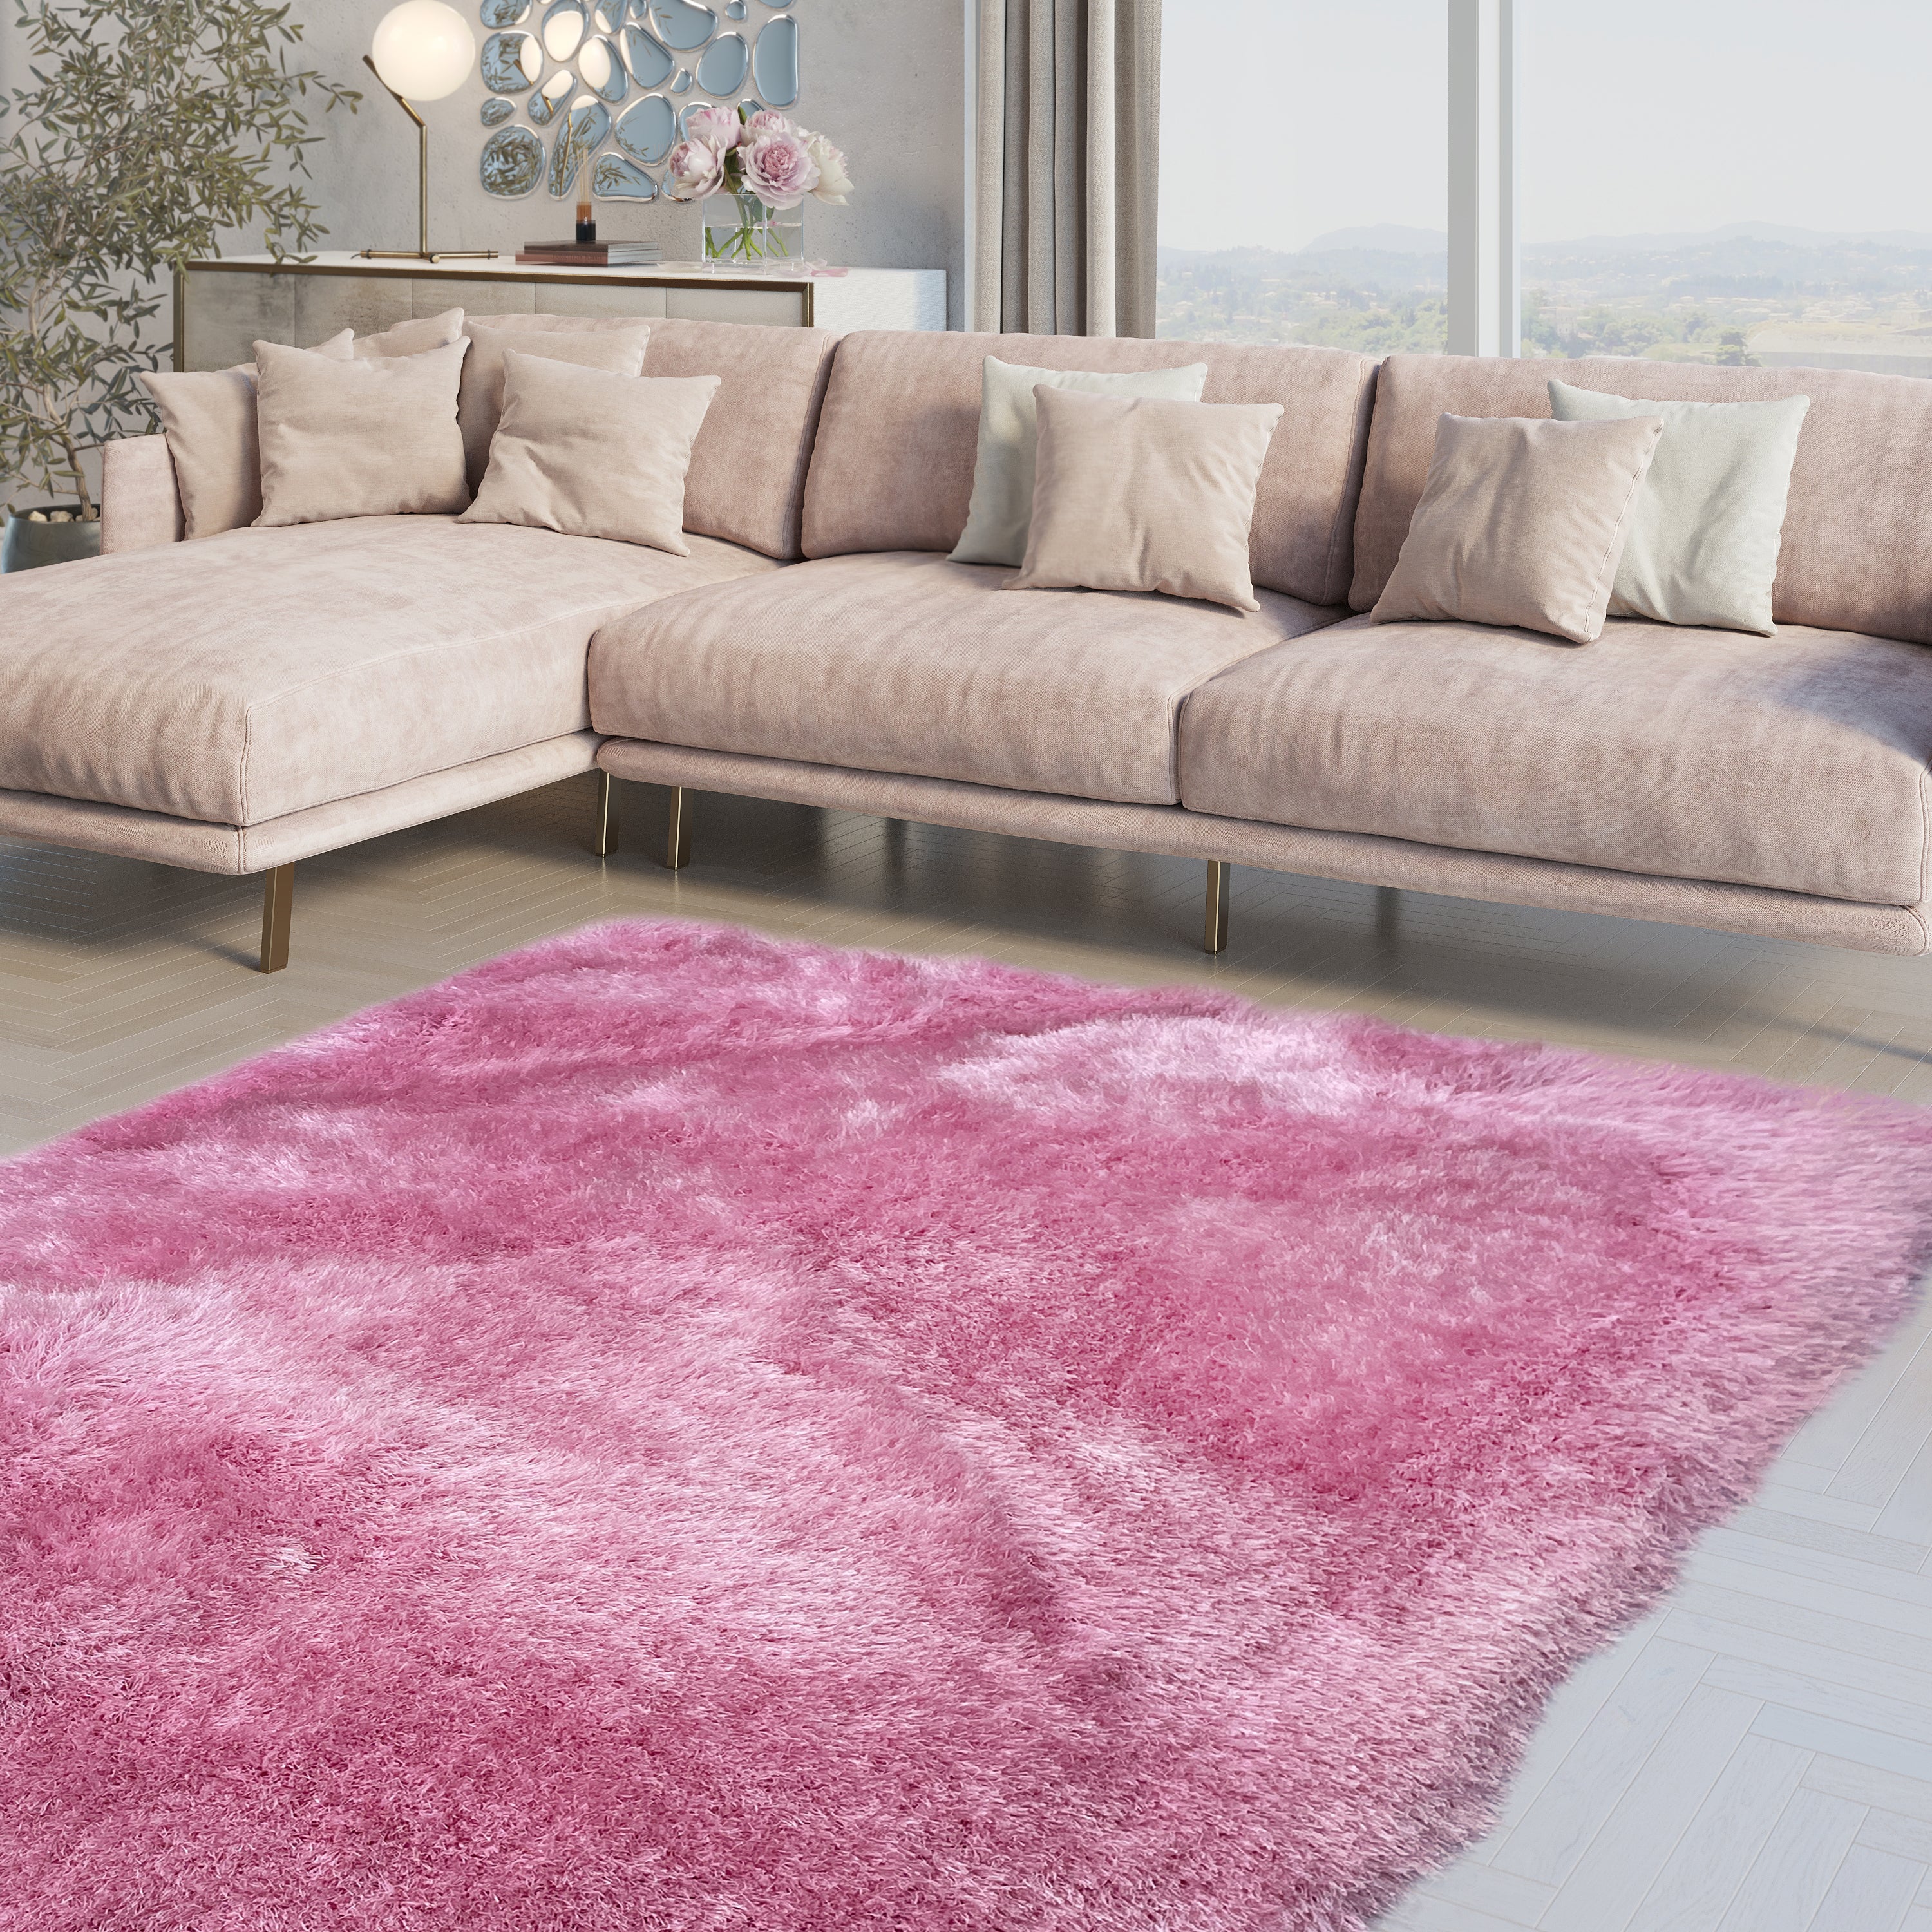 Glorious Pink Rose Solid Shag Area Rug